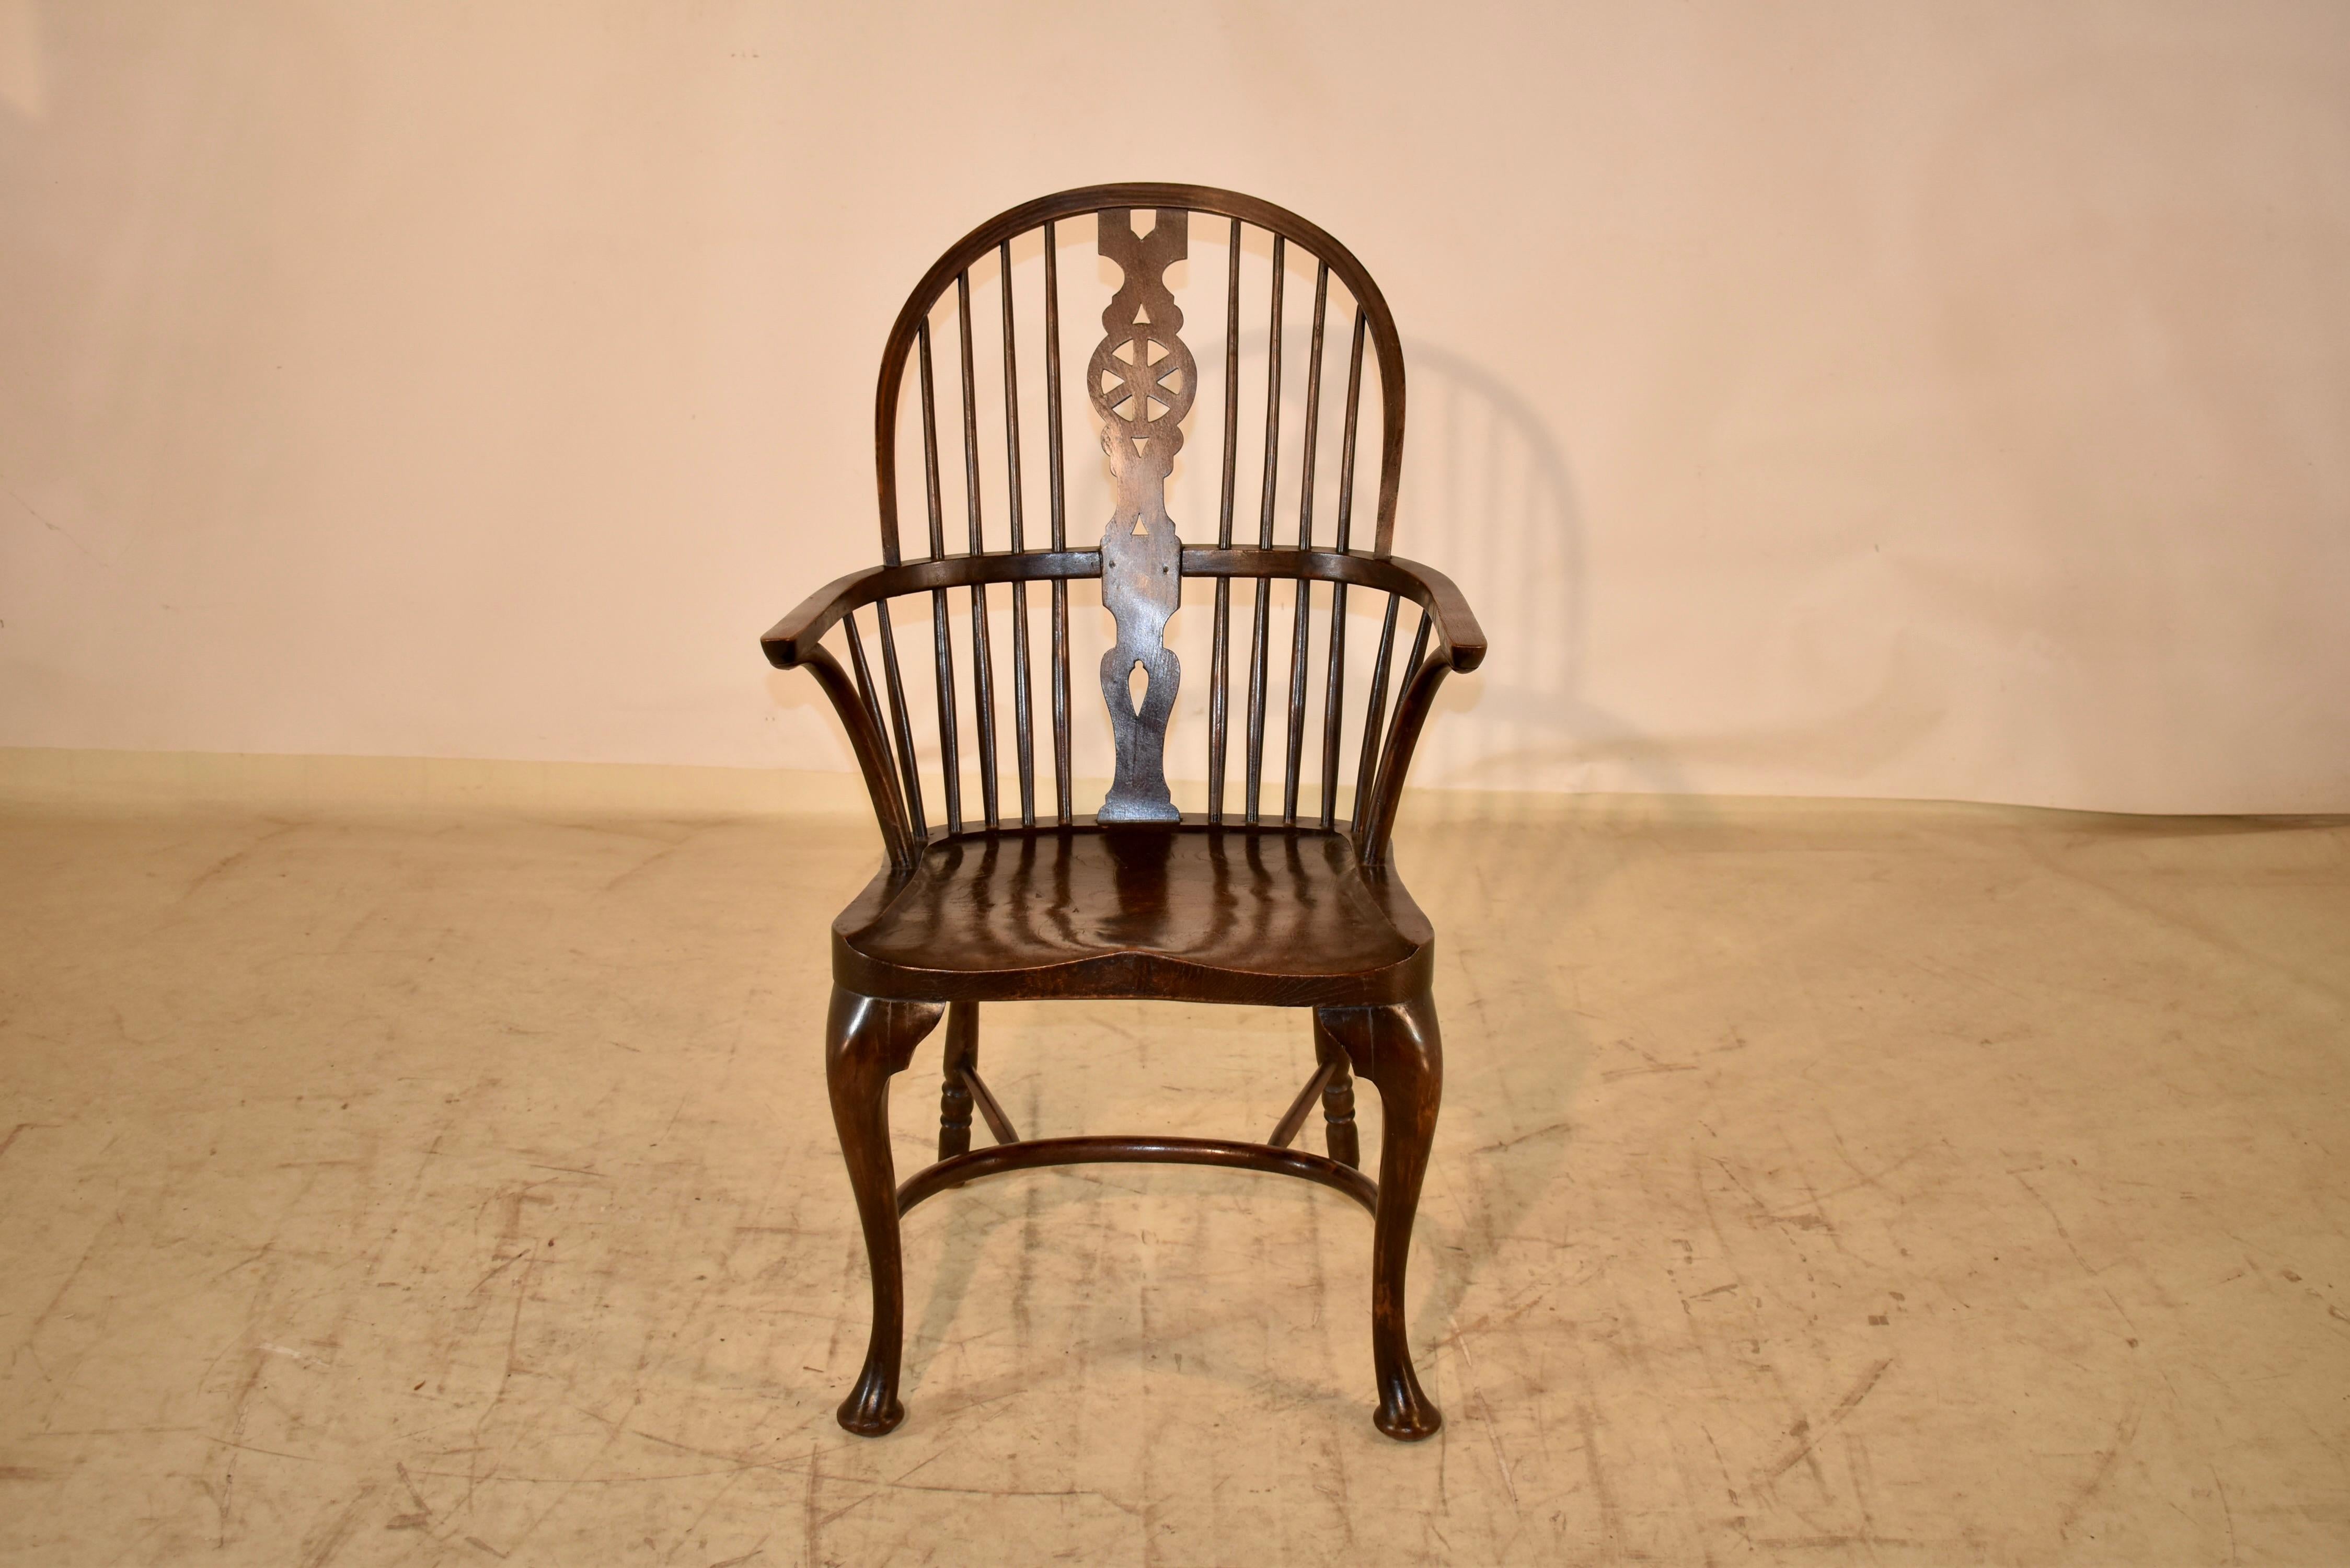 Circa 1900 Windsor armchair made from oak.  It having a double bow with a hooped spindle back and a central wheel splat flanked by spindles, over a saddled elm seat standing on front cabriole legs and turned back legs joined by a crinoline curved